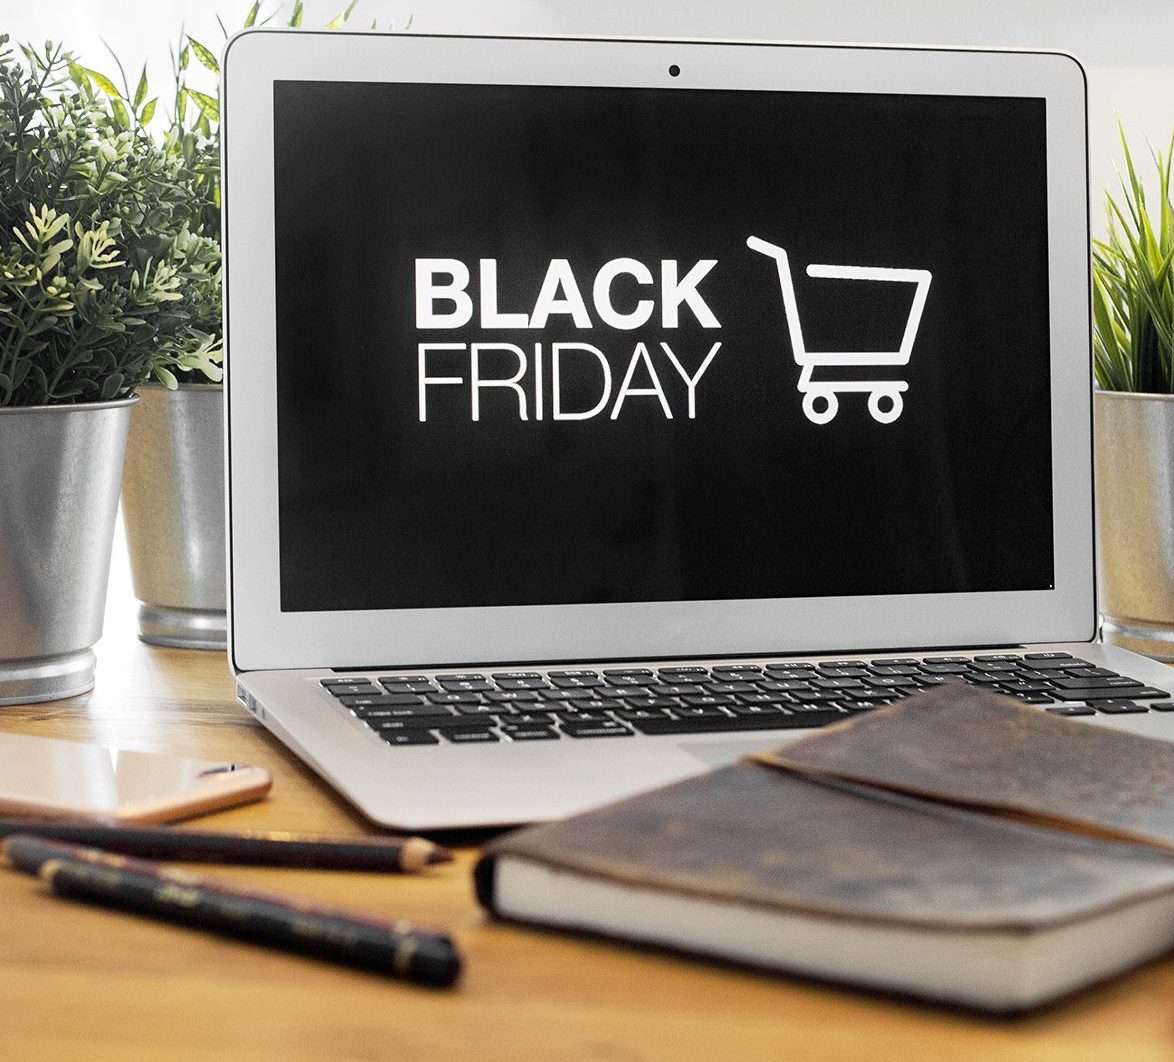 8 Hacks to Have the Best Black Friday